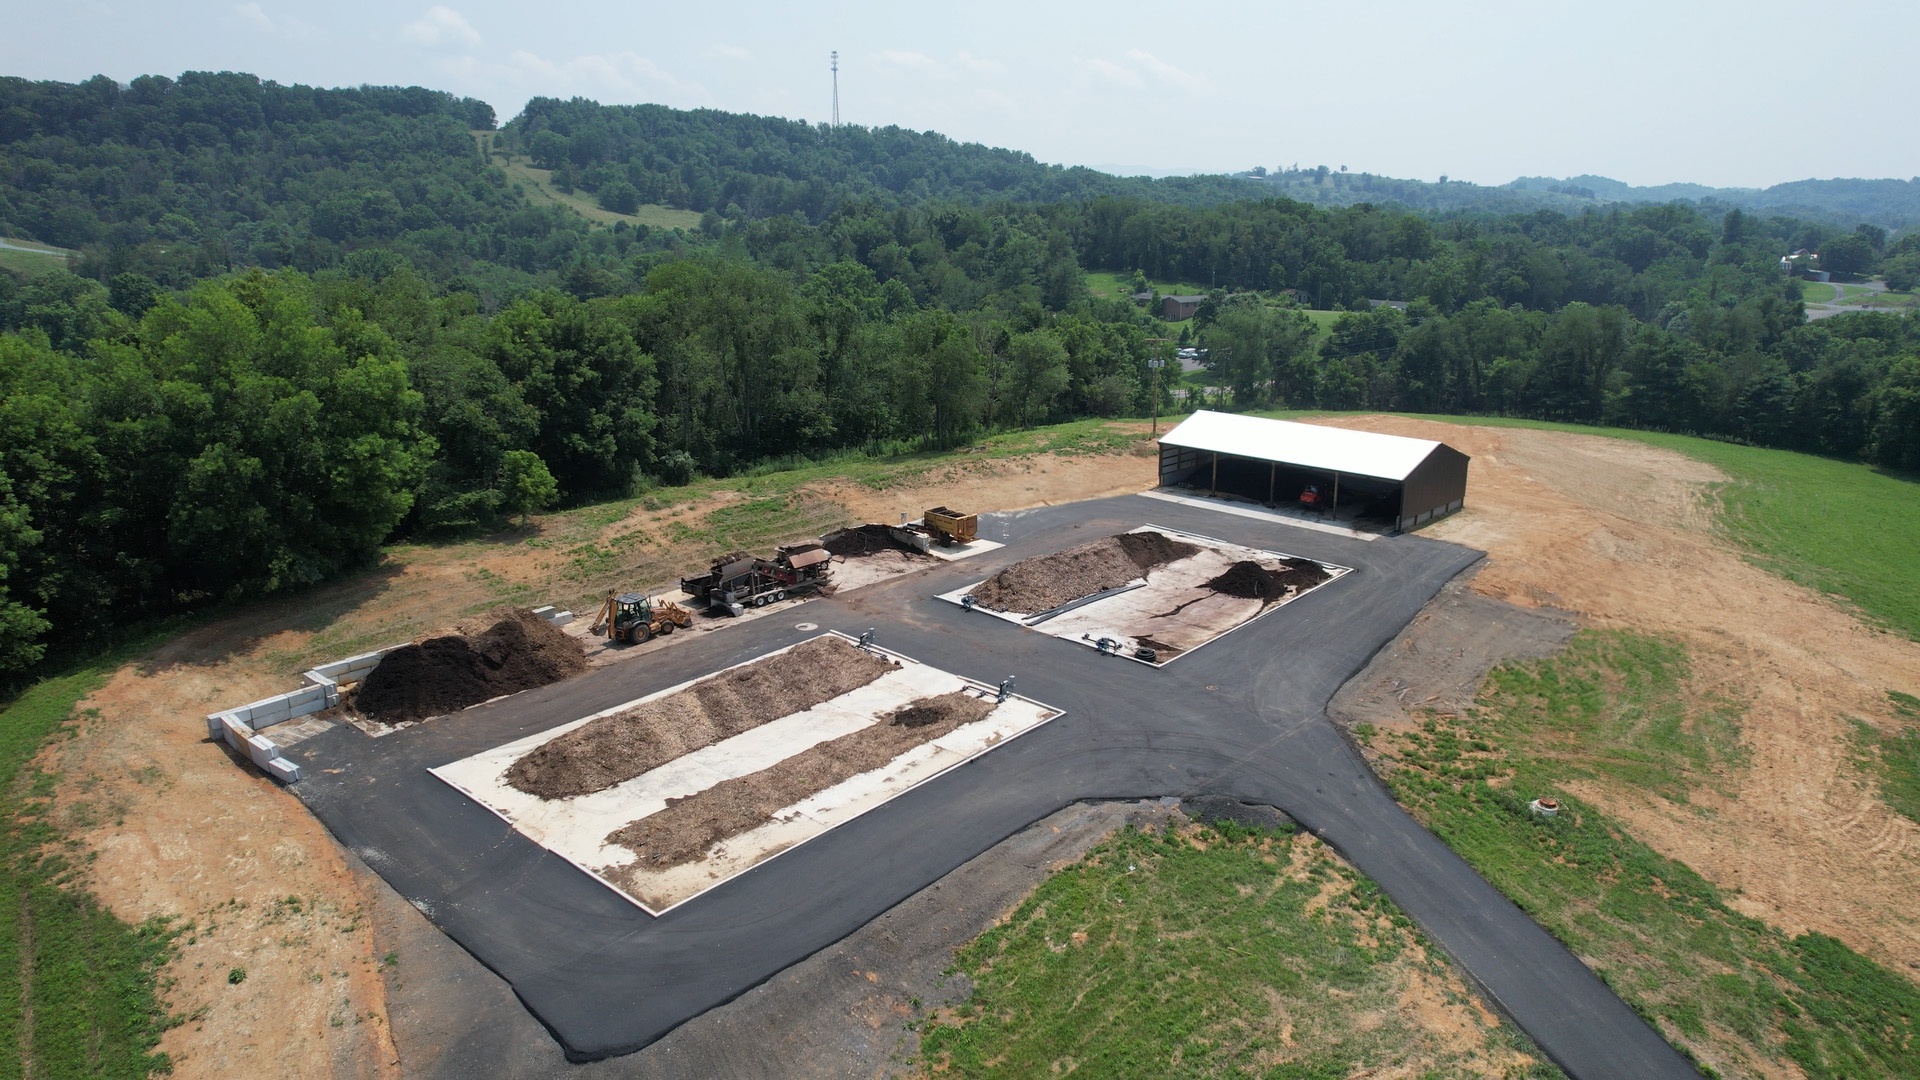 BioSolids composting facility in Marion